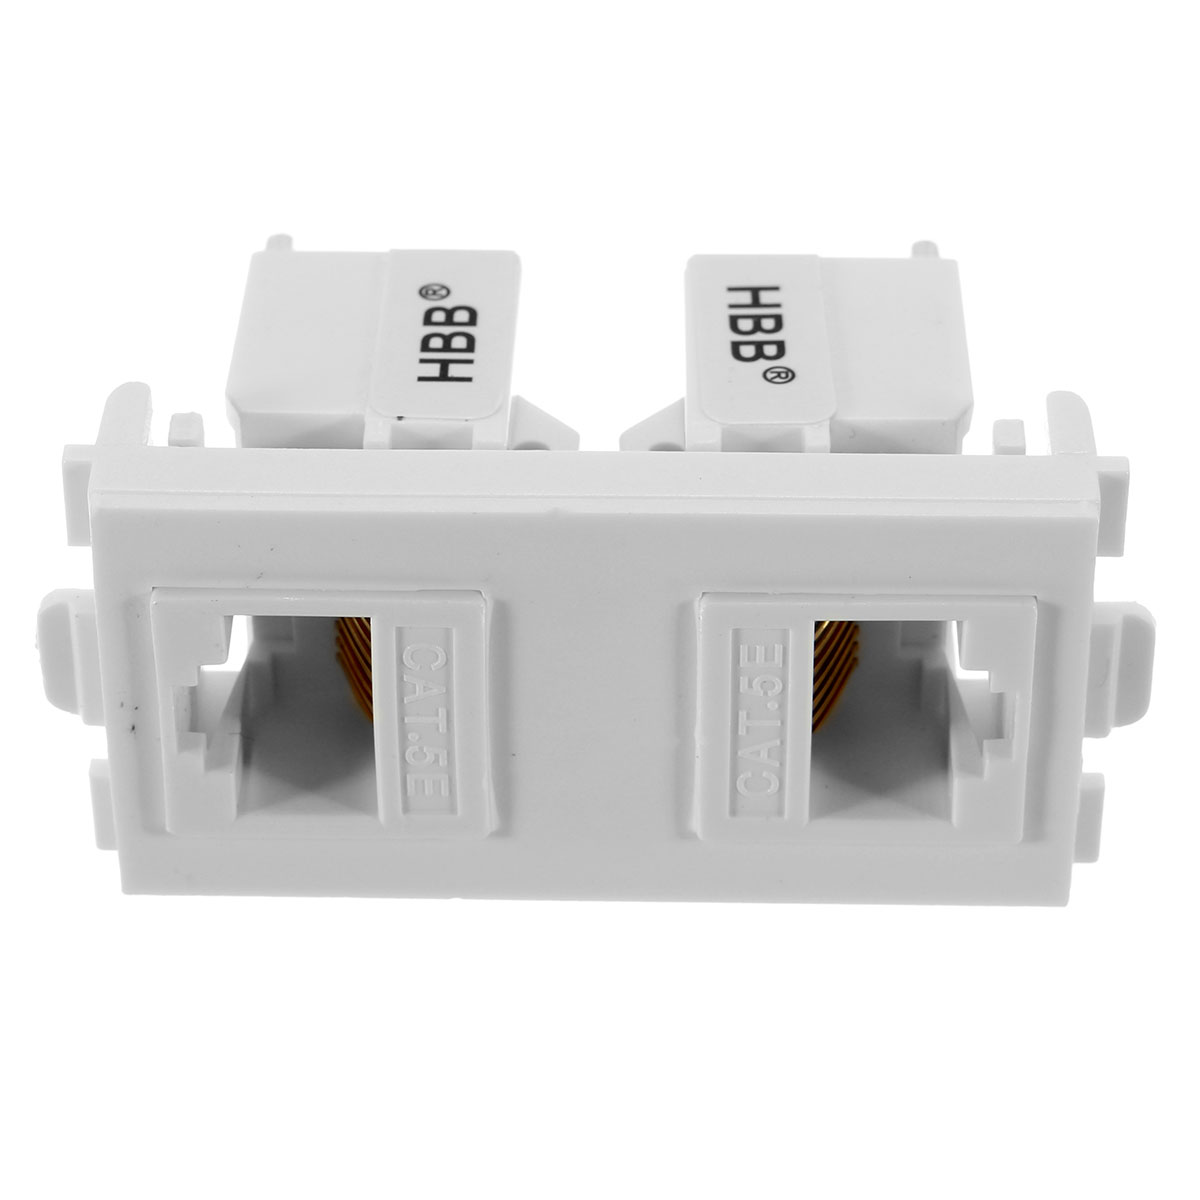 RJ45-Wall-Plate-Dual-Port-Socket-Panel-Building-Materials-Network-Combination-Connector-Module-1401148-4